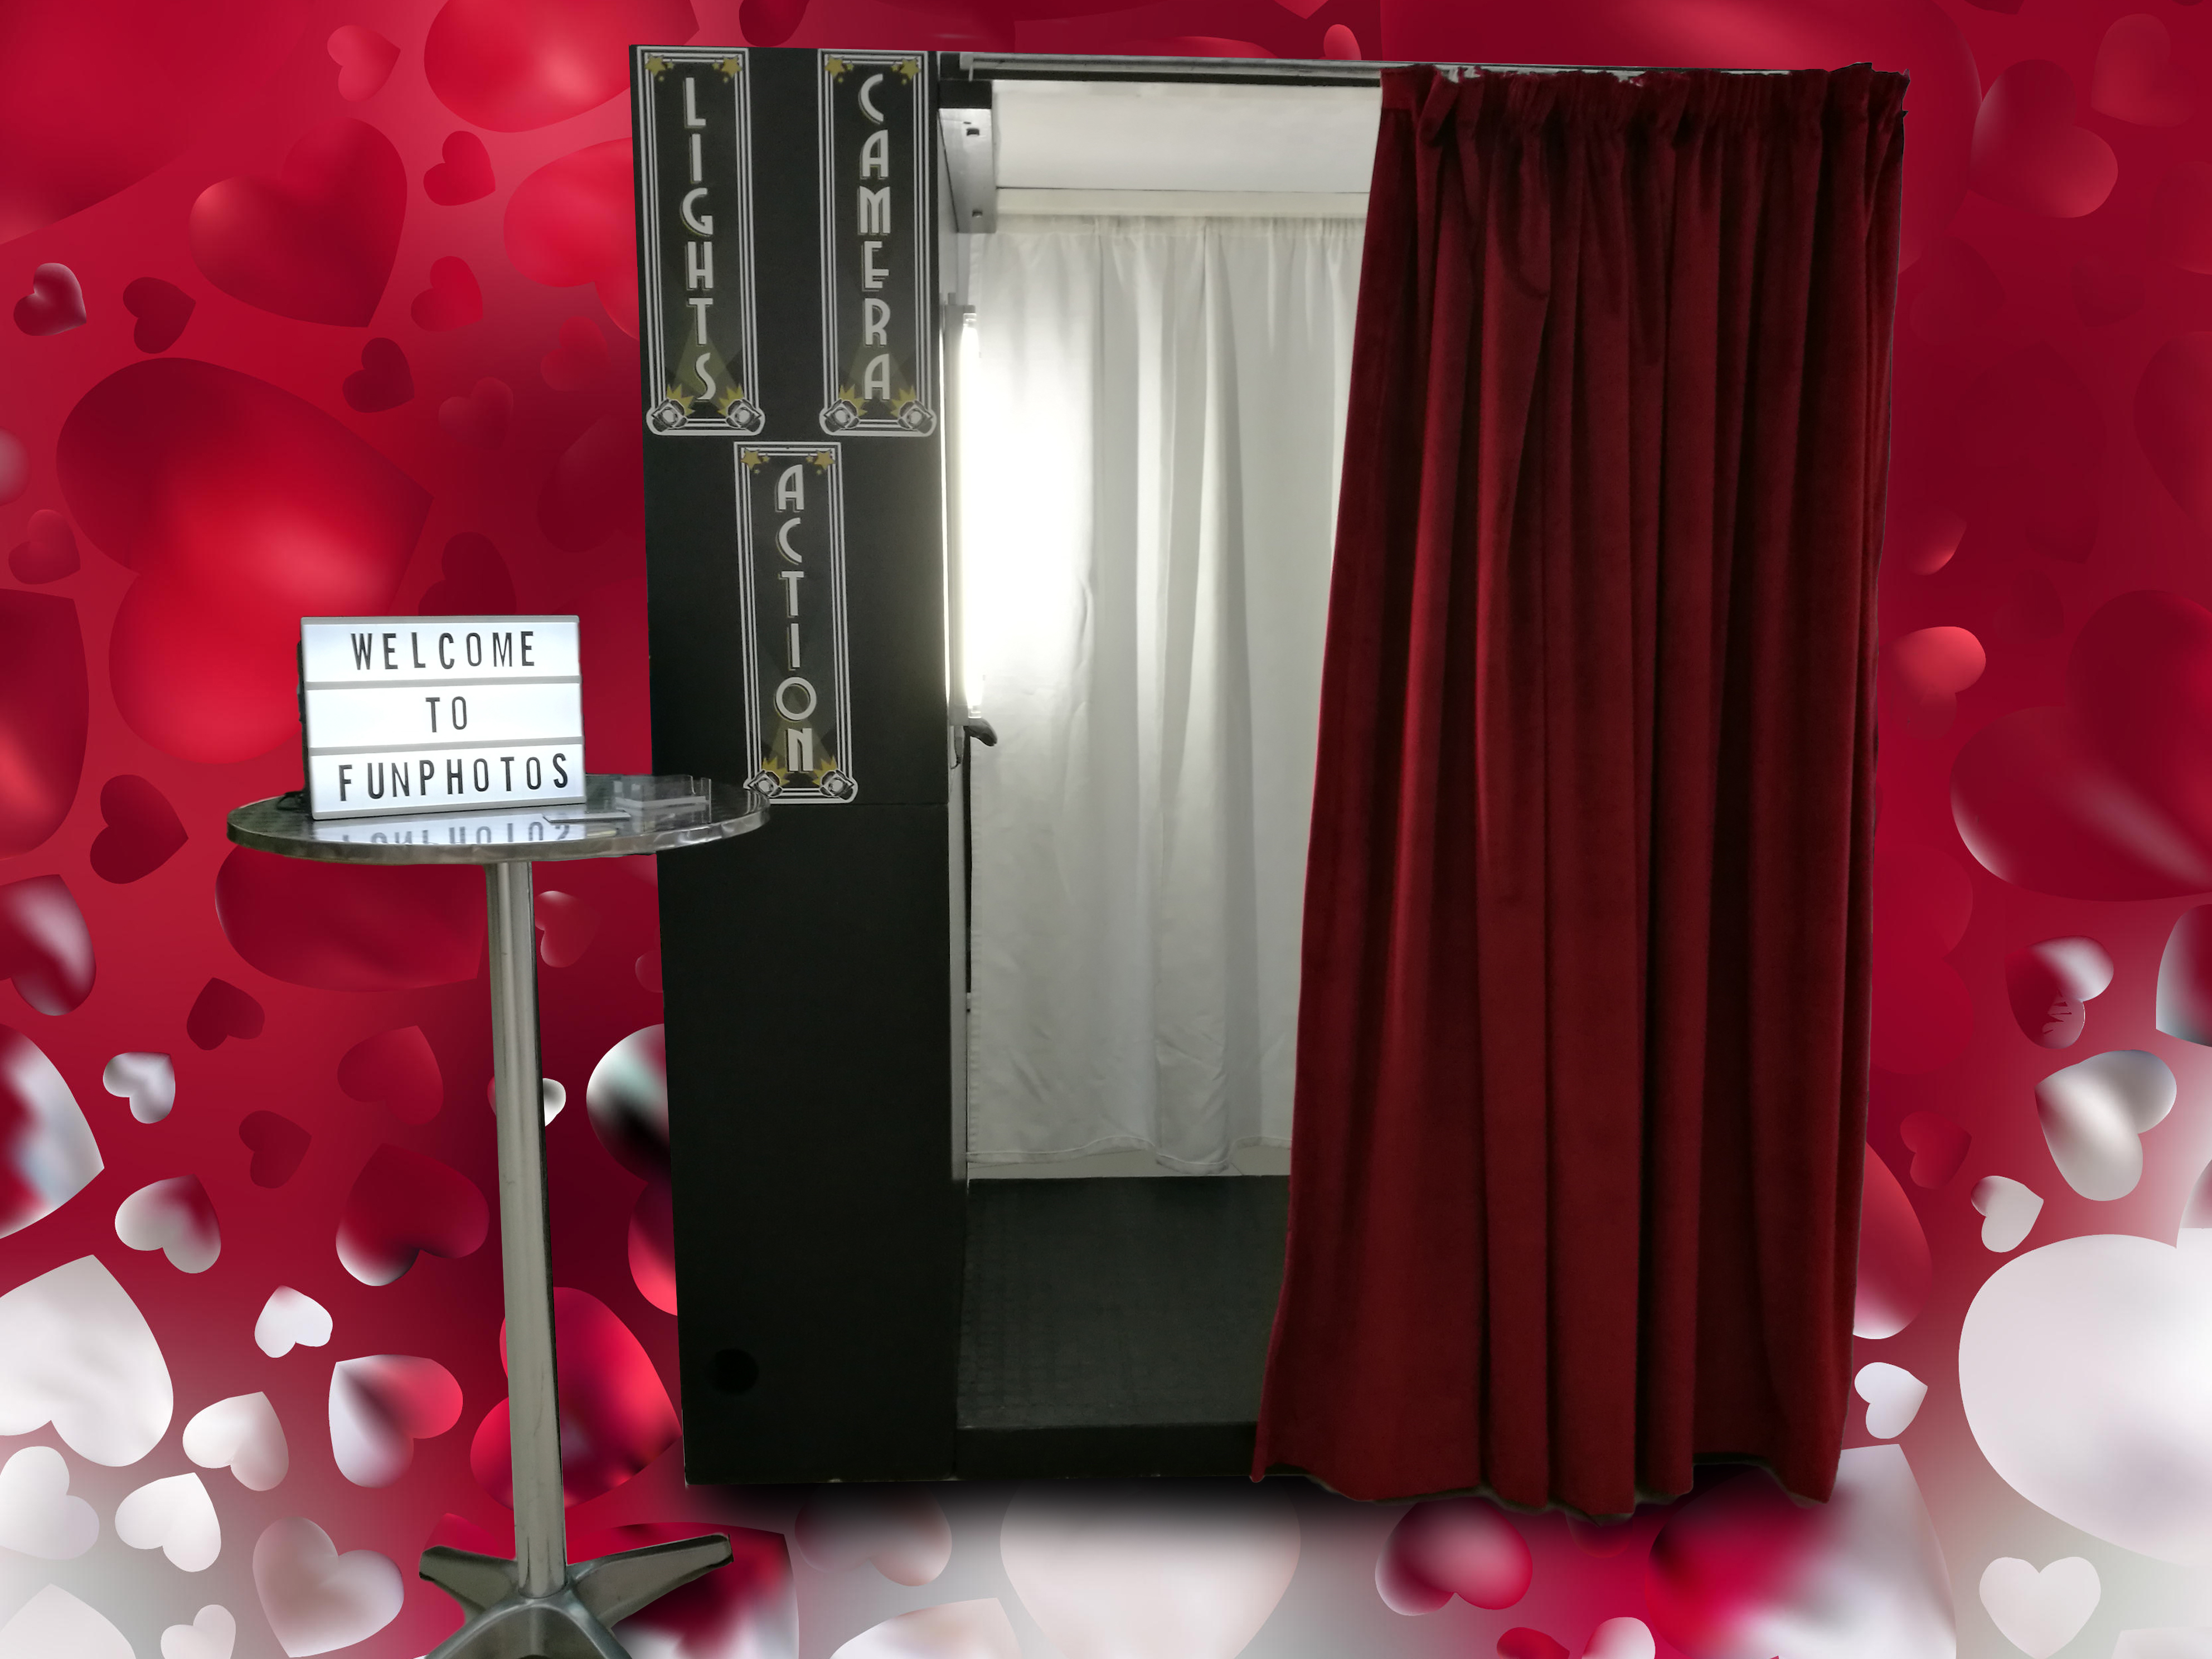 Express Your Selfie in our Fun Photobooth